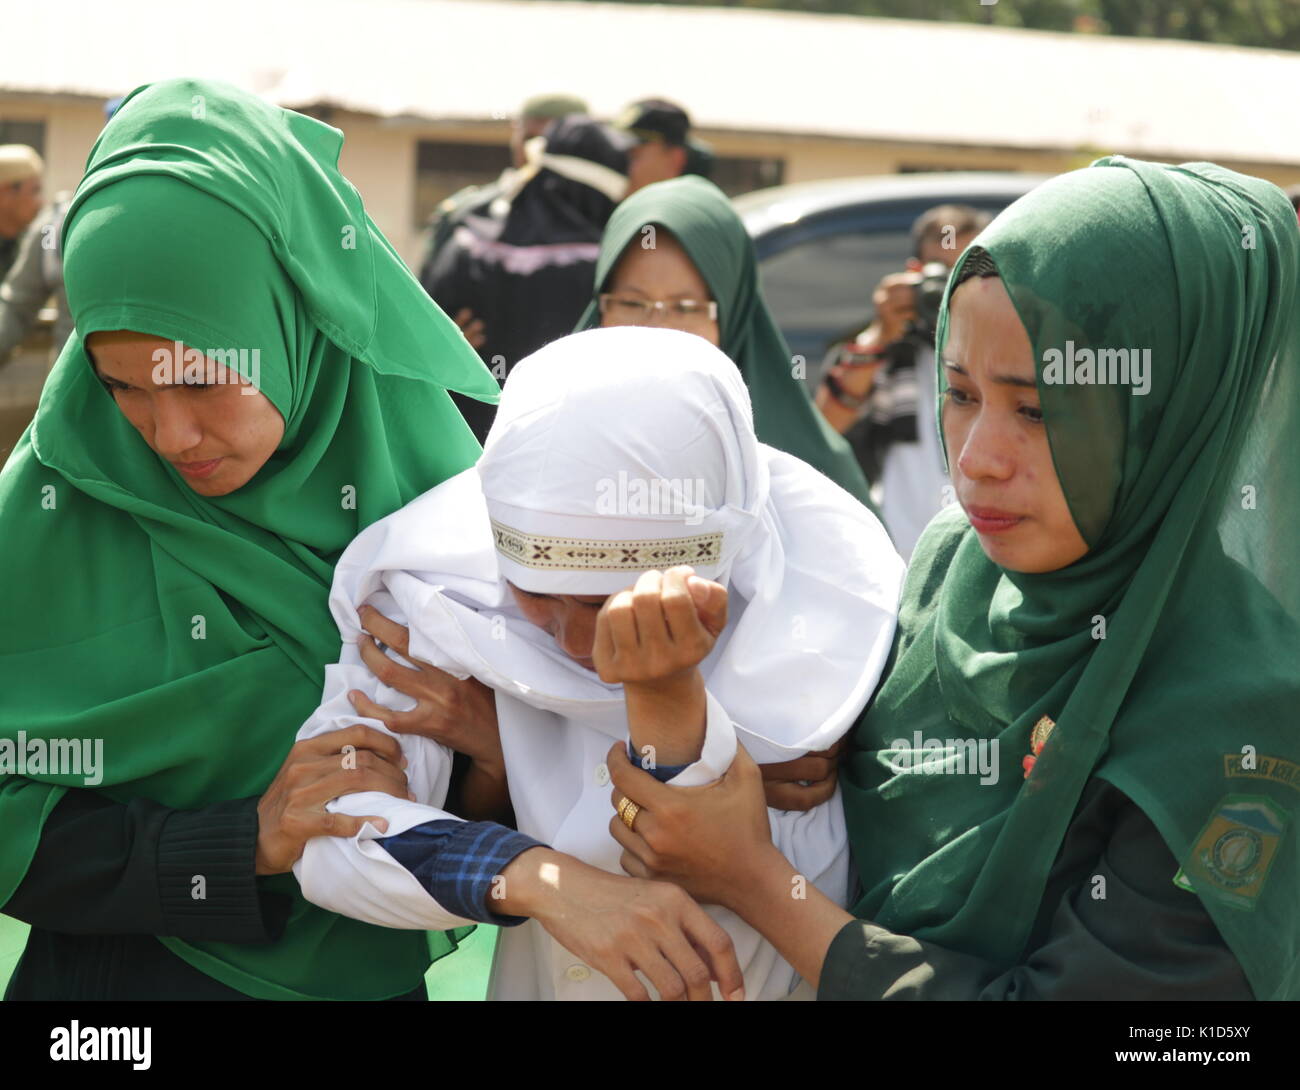 Aceh Besar, Indonesia. 25th Aug, 2017. An offender of sharia law in pain after being flogged in Jantho, Aceh Besar Regency, Aceh Province, Indonesia. After serving the caning, every offender will be checked for health. Credit: Abdul Hadi Firsawan/Pacific Press/Alamy Live News Stock Photo